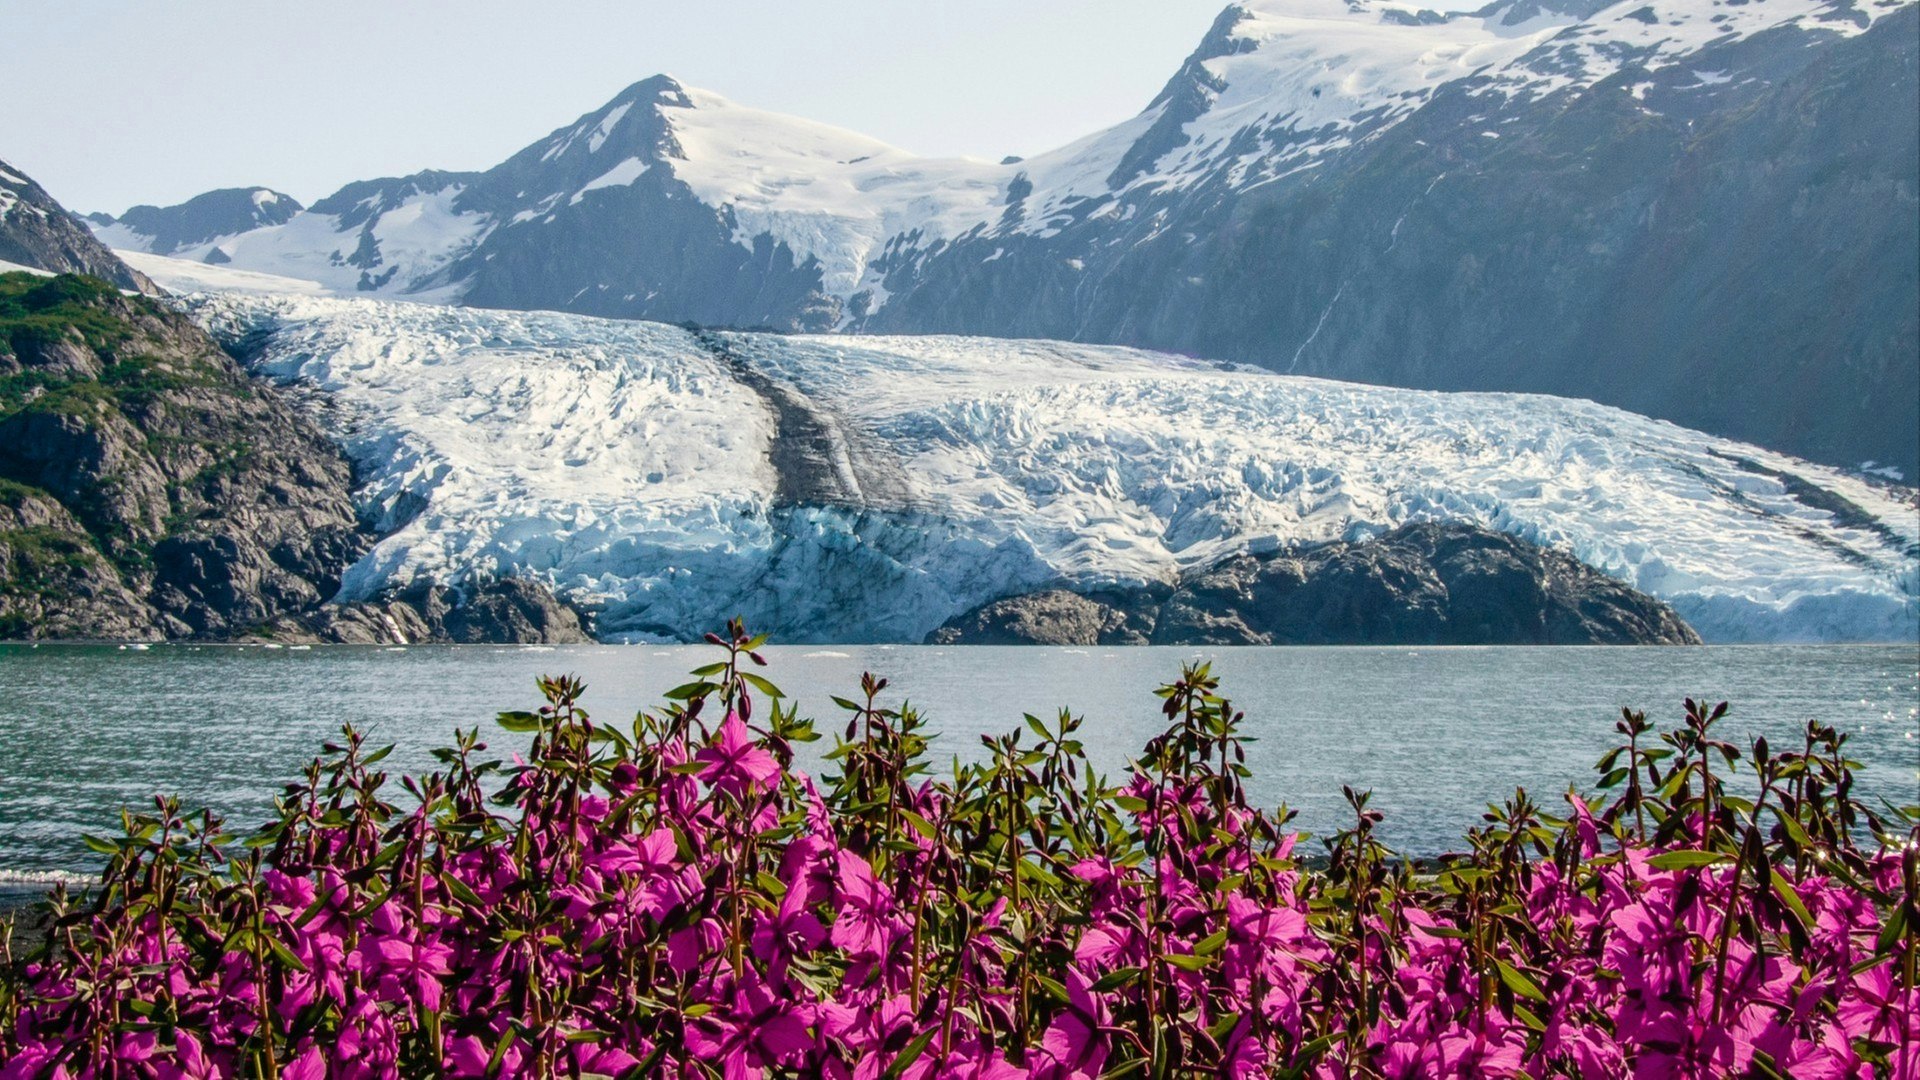 View of Portage glacier in the Chugach mountains and Portage lake on the background and pink blooming fireweed on the foreground. Shot in the USA, Alaska, in summer.